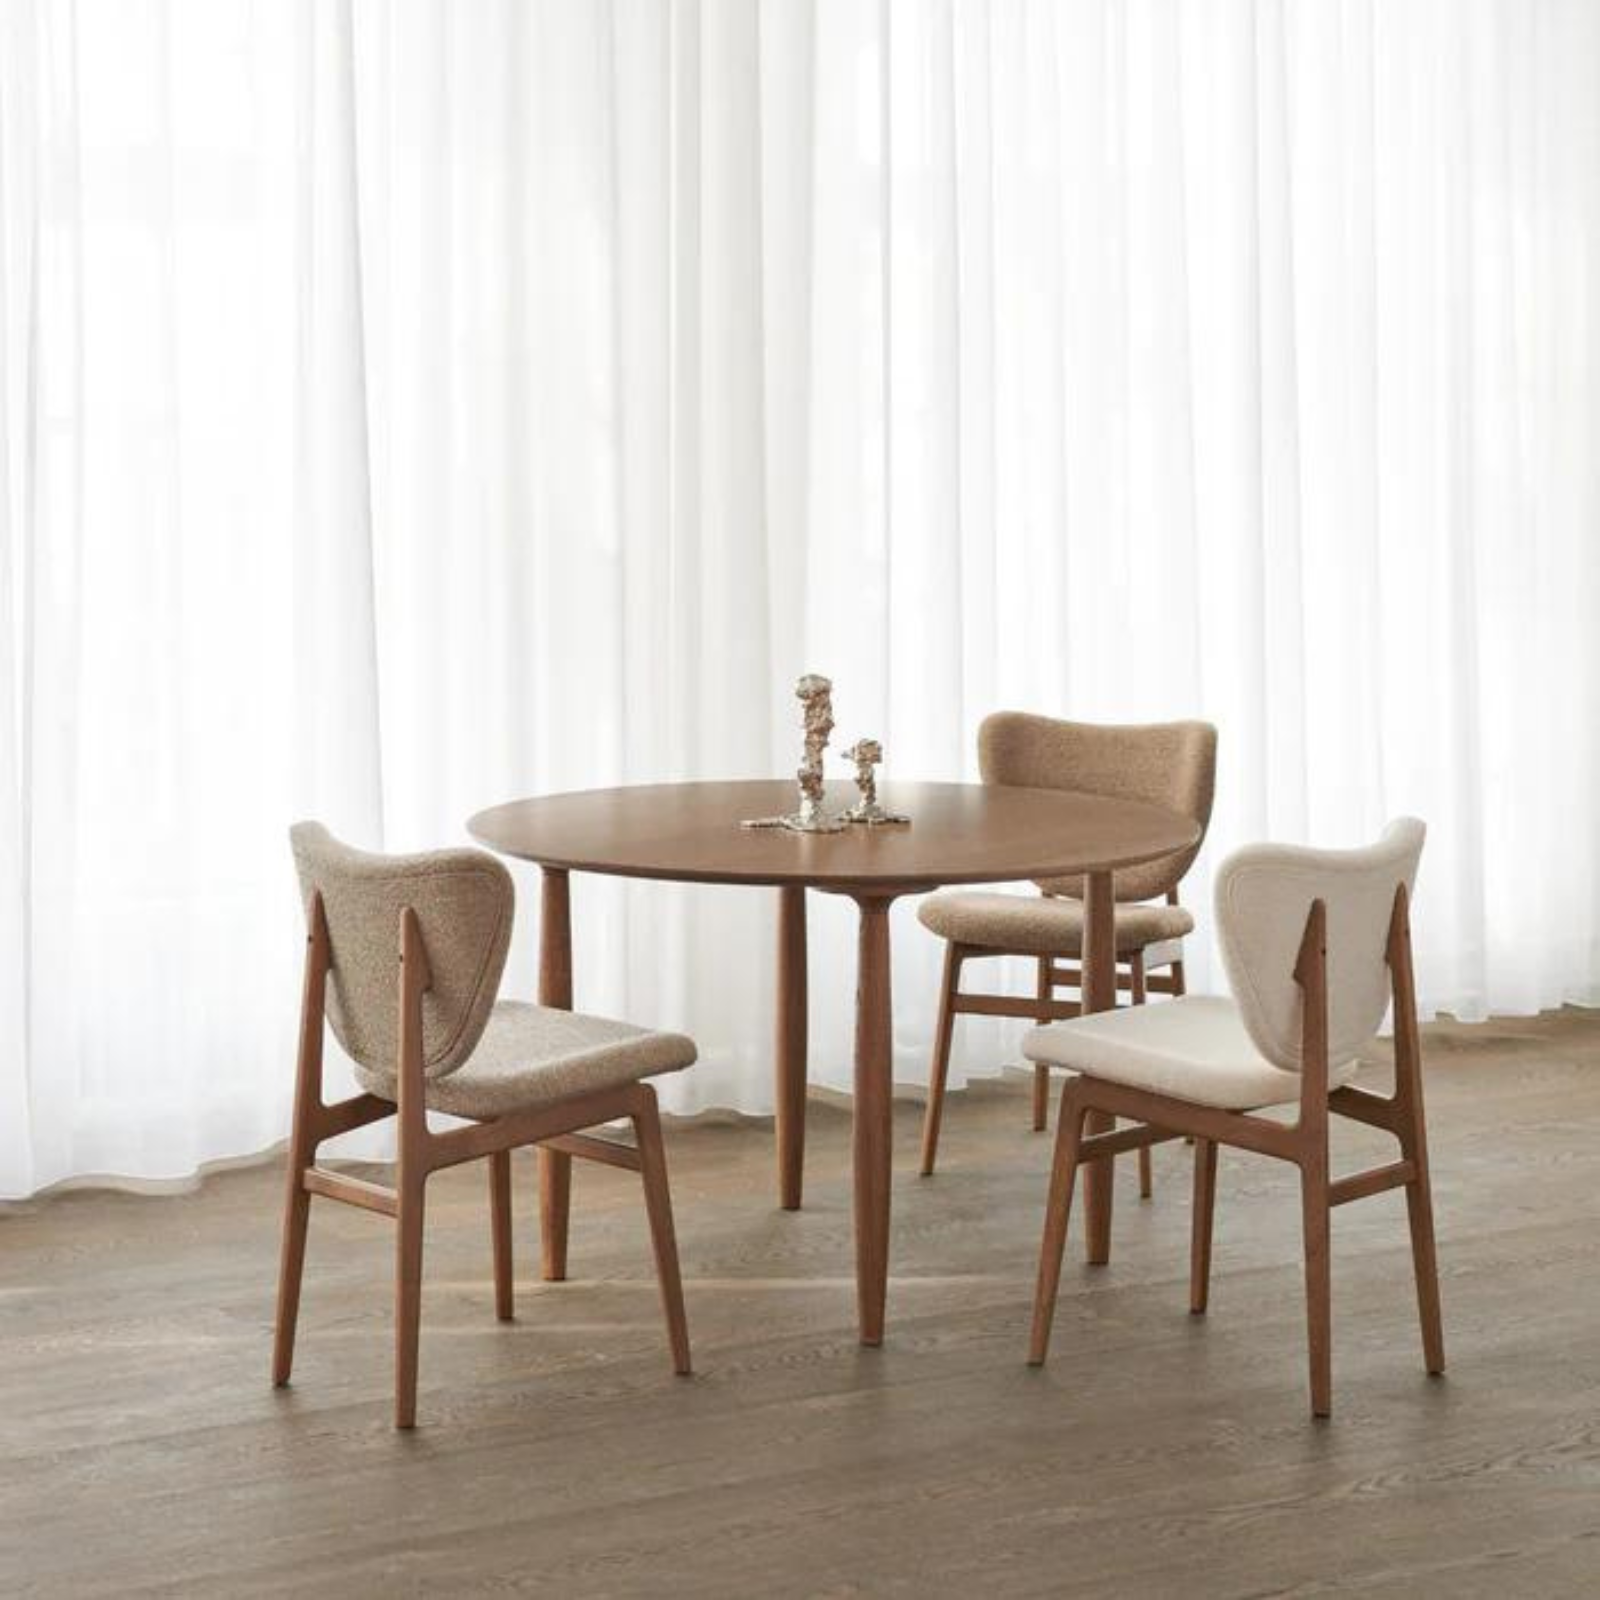 NORR11 Elephant Dining Chair fully upholstered seat and back both sides Barnum3 Oak Light Smoked 540 in dinning